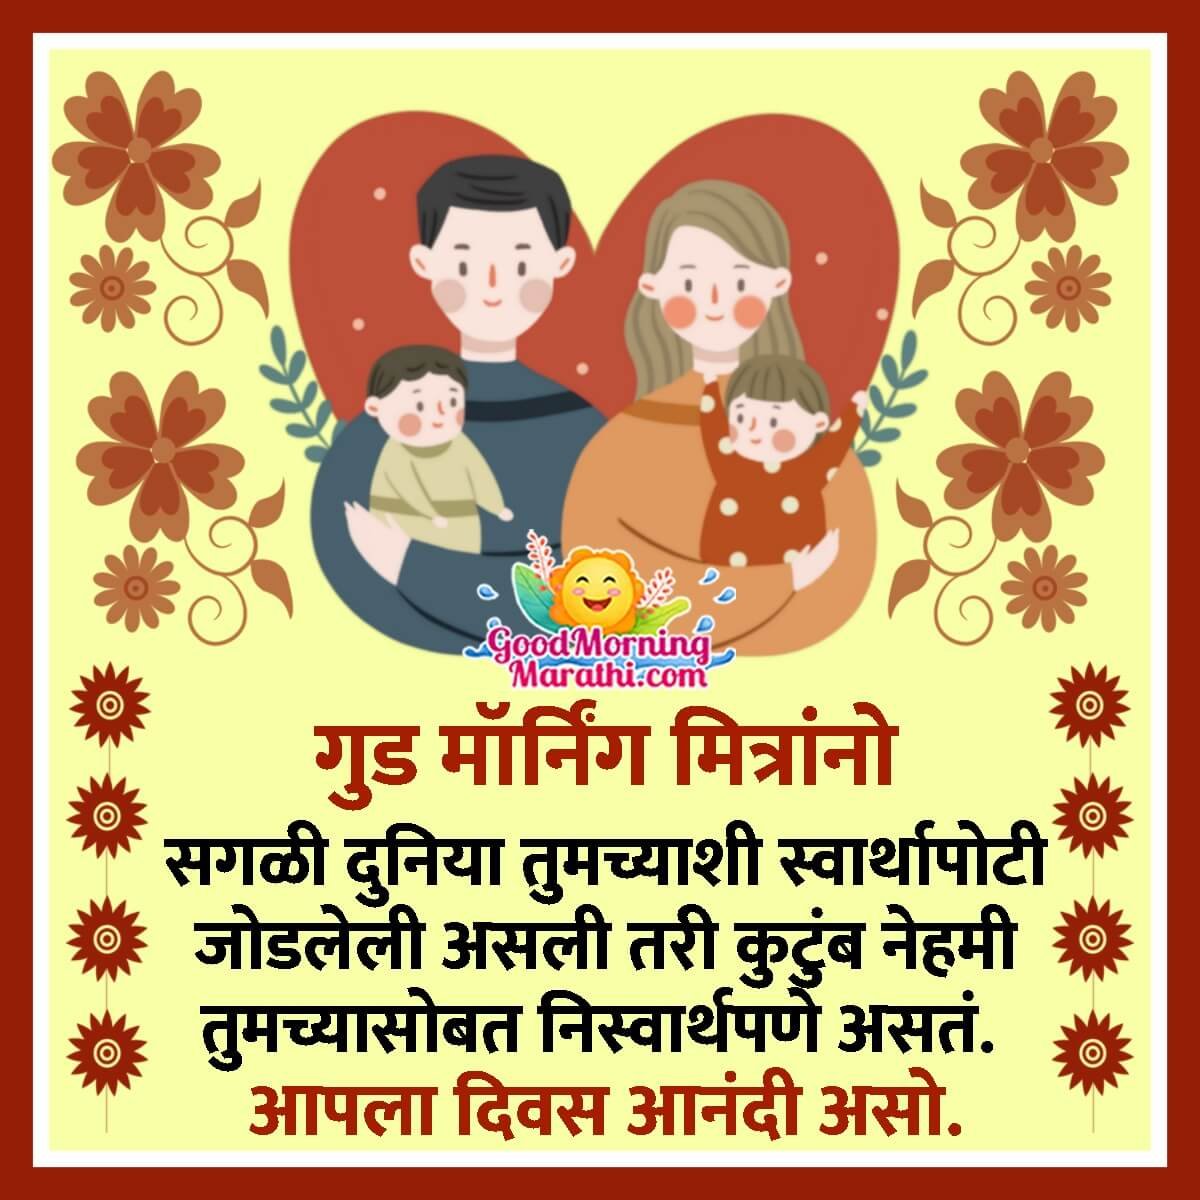 Good Morning Family Quotes in Marathi